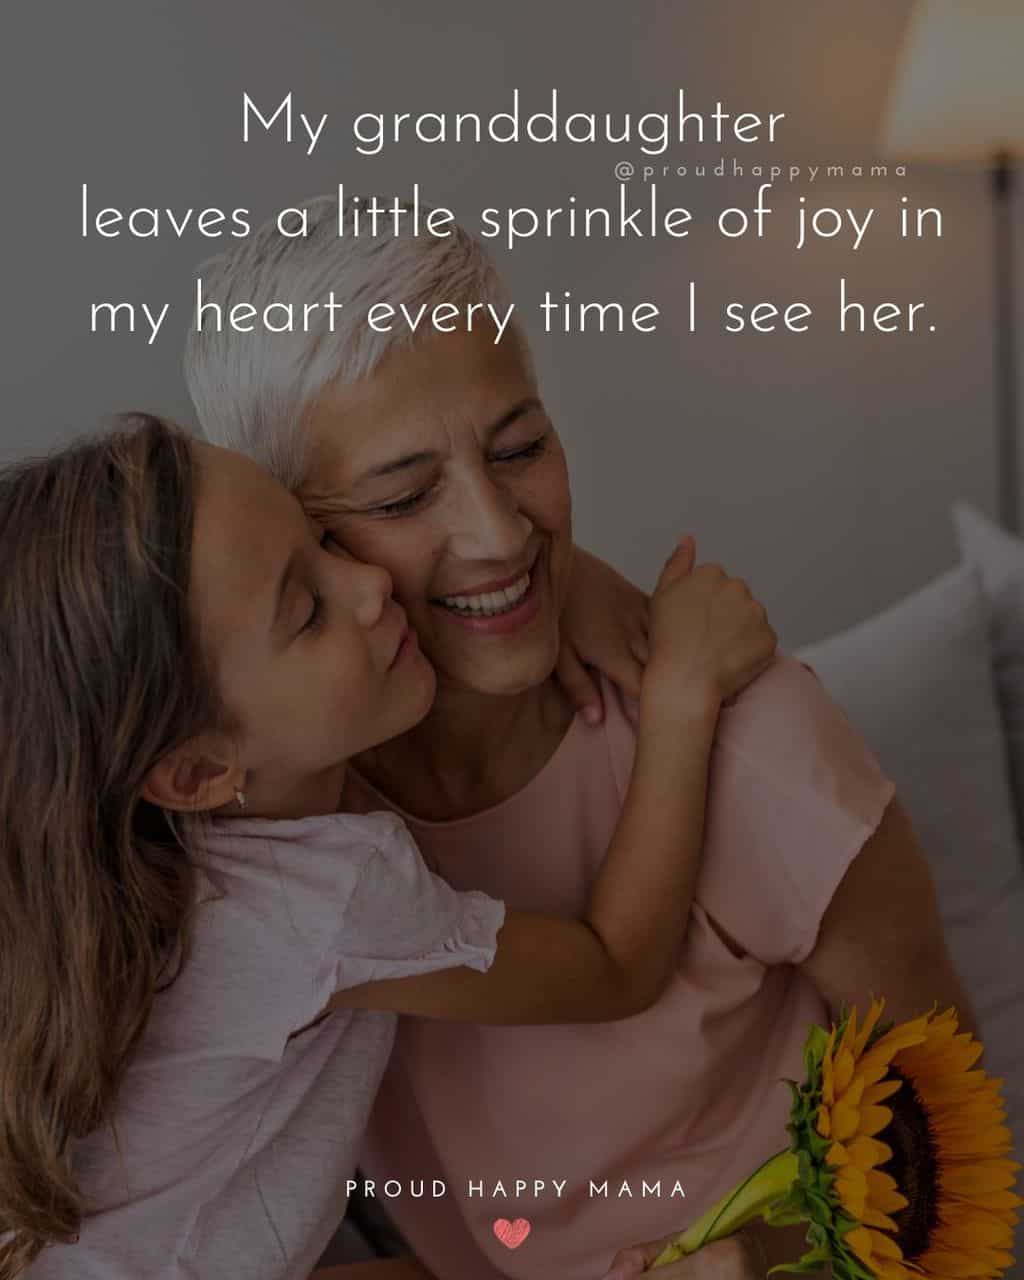 Granddaughter Quotes - My granddaughter leaves a little sprinkle of joy in my heart every time I see her.